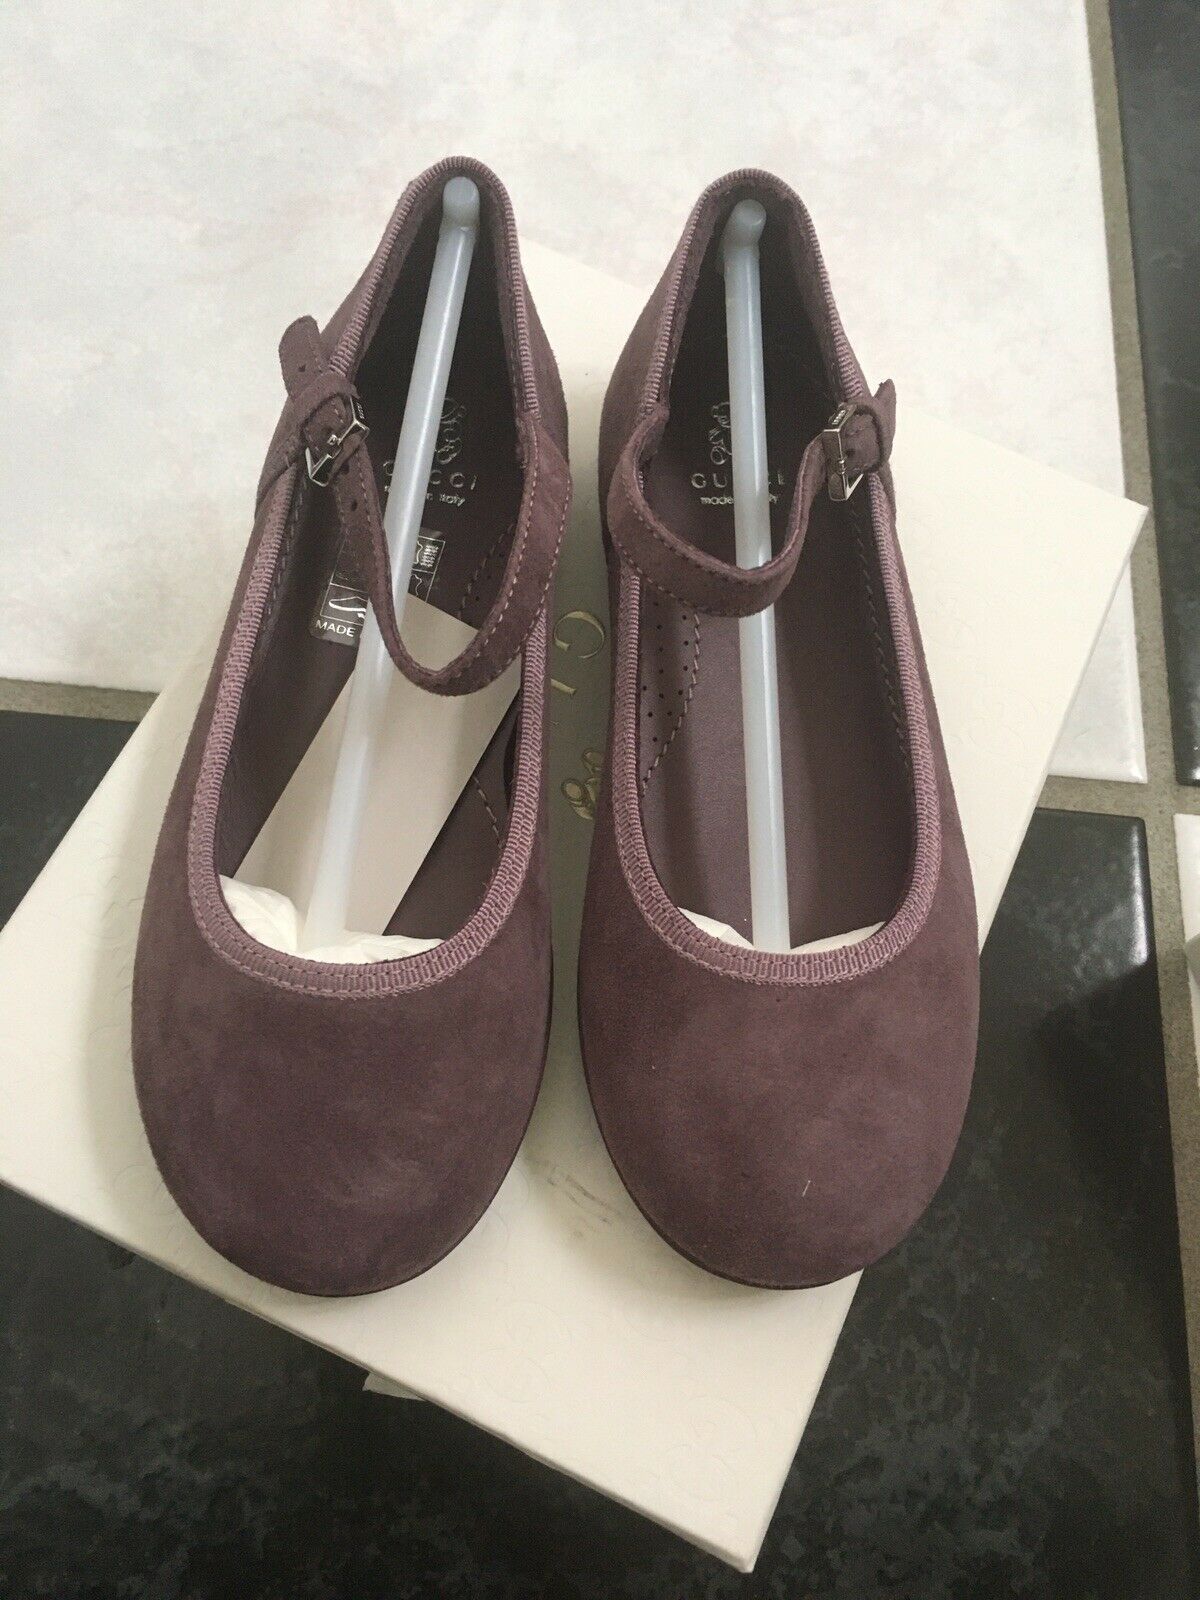 NIB 100% AUTH Gucci Toddler Kids Lilac Suede Mary Jane Flats GG Logo 356098  - $168.00